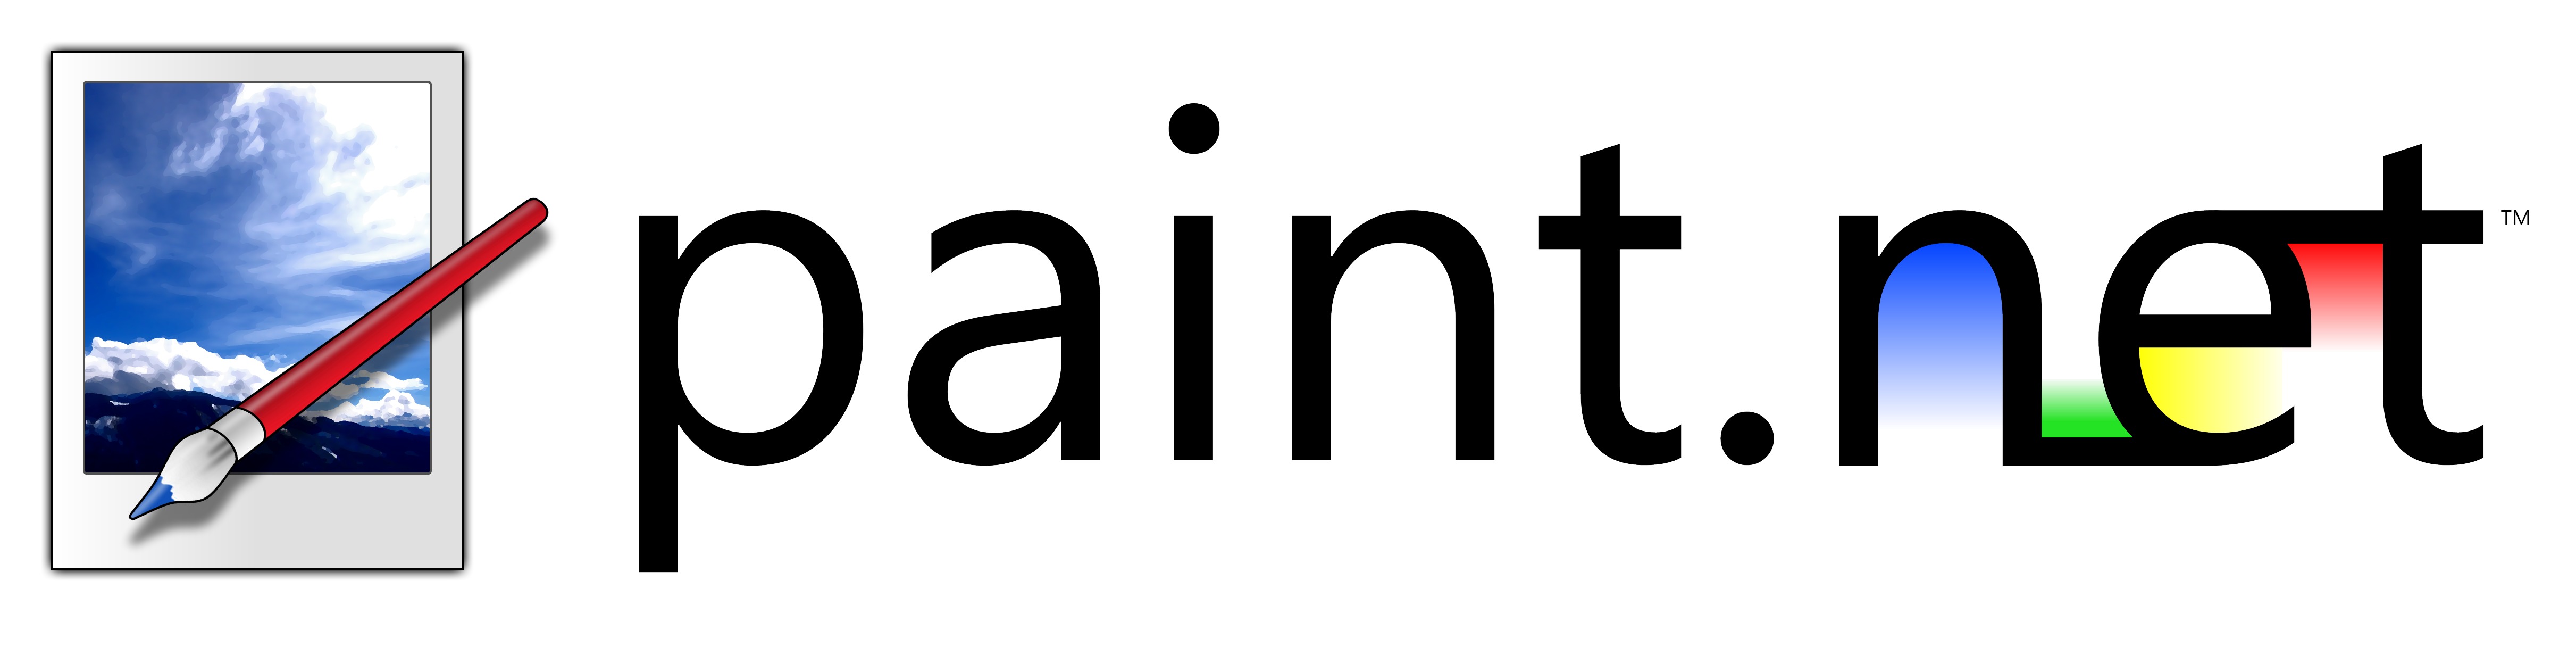 making a gif paintnet